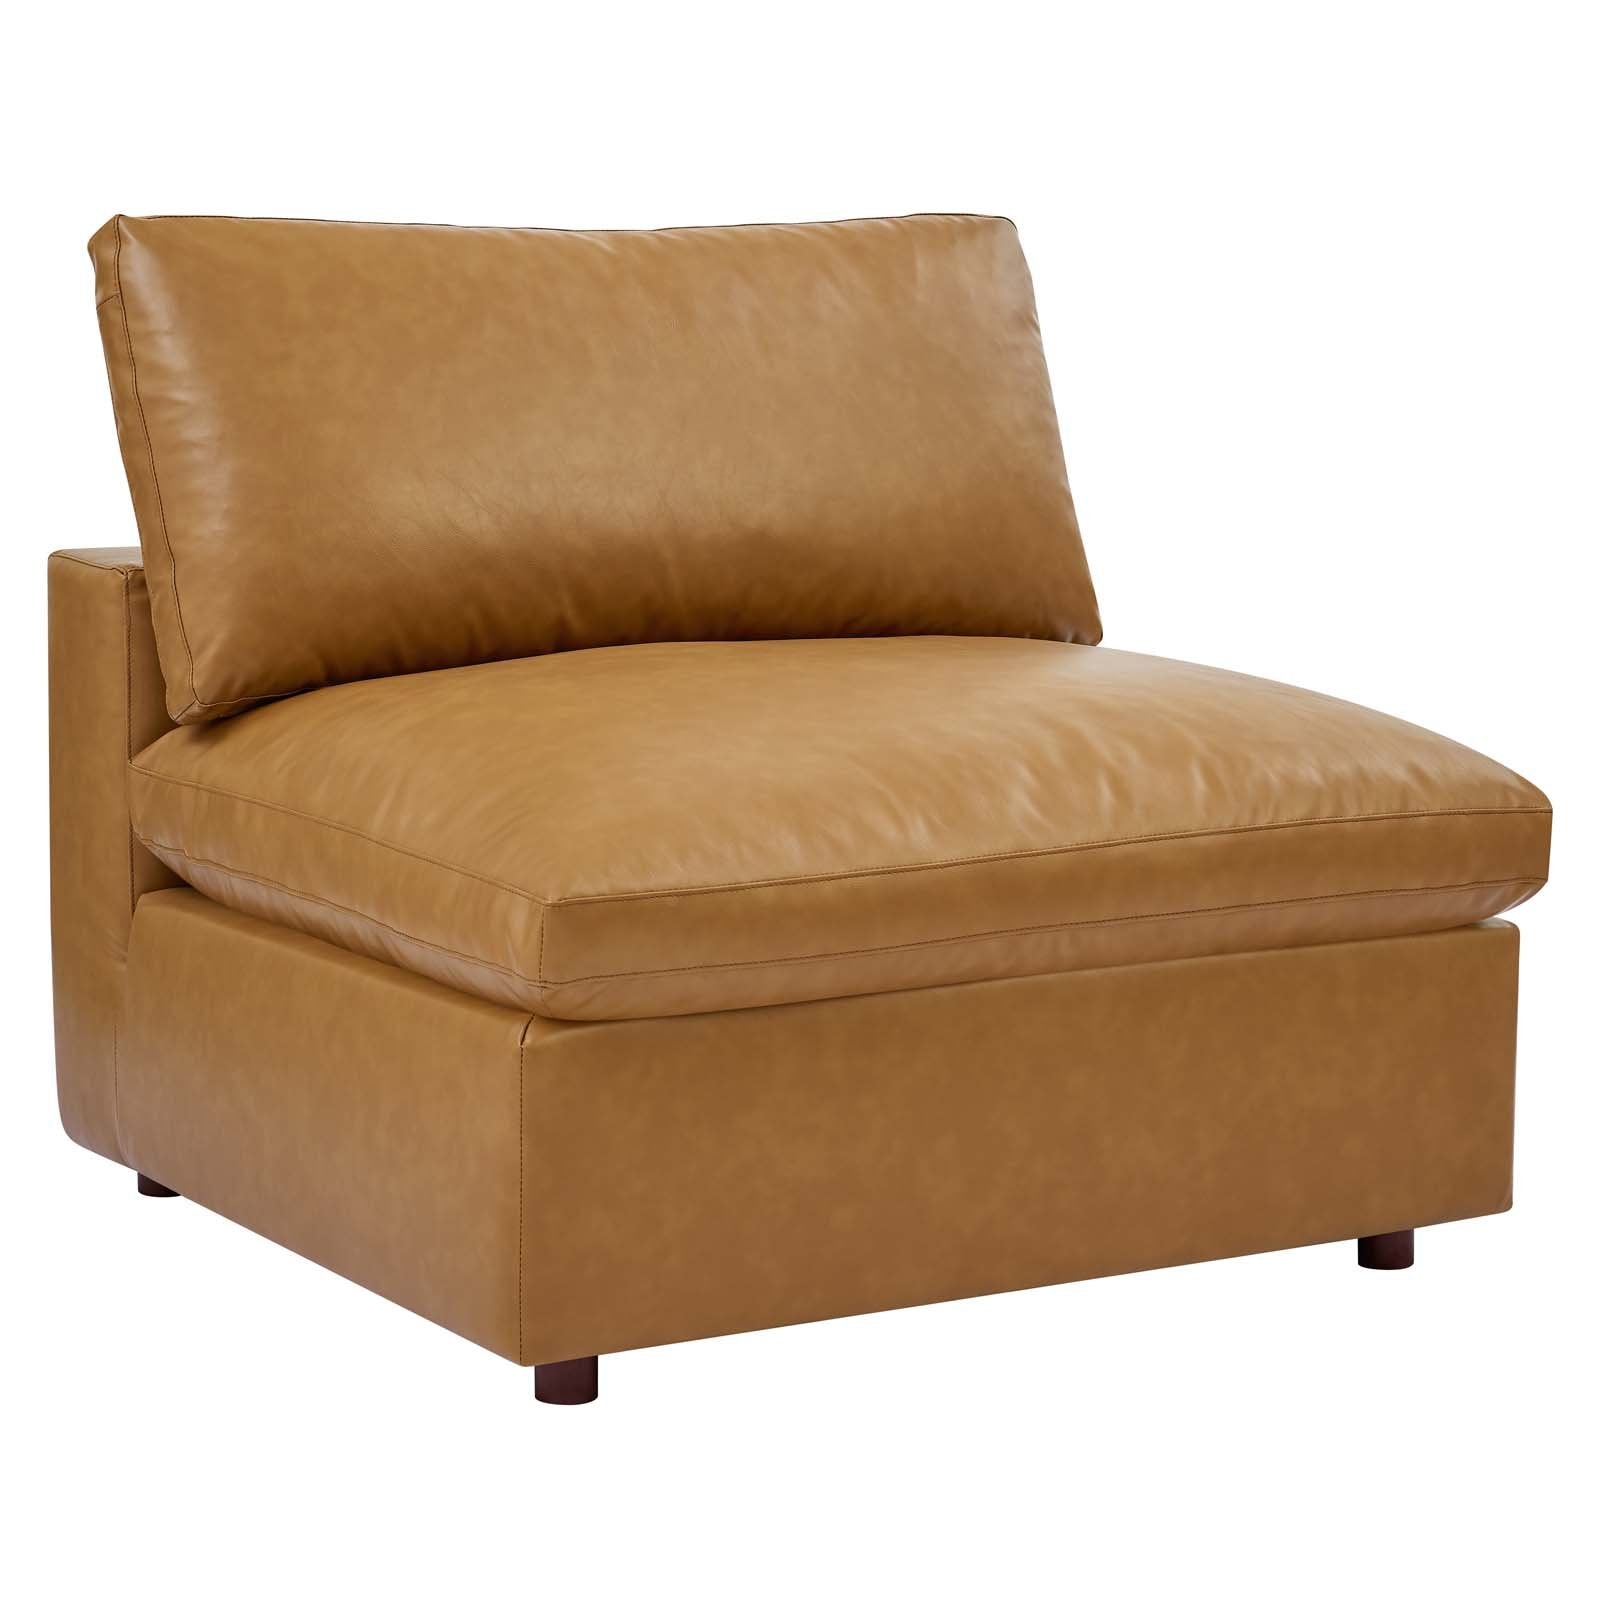 Commix Down Filled Overstuffed Vegan Leather Armless Chair - East Shore Modern Home Furnishings